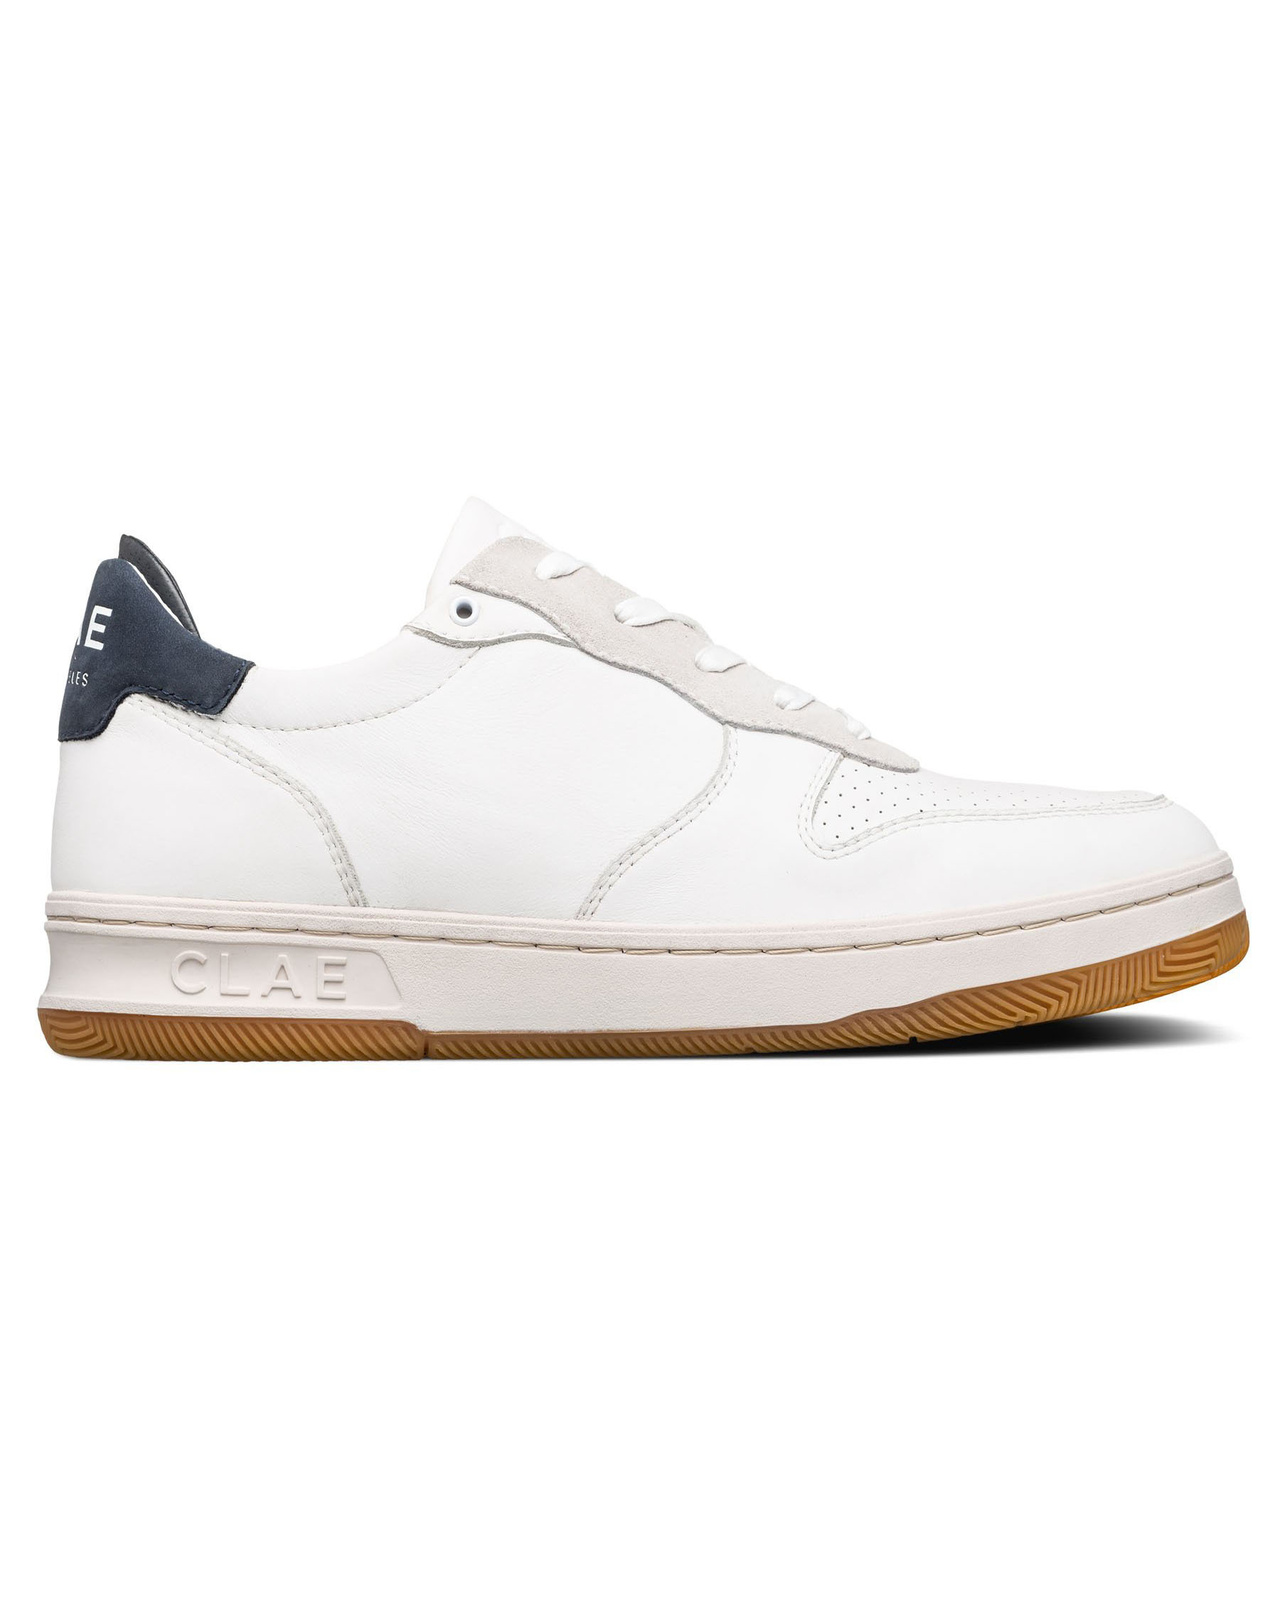 Malone White Milled Leather Navy - 36